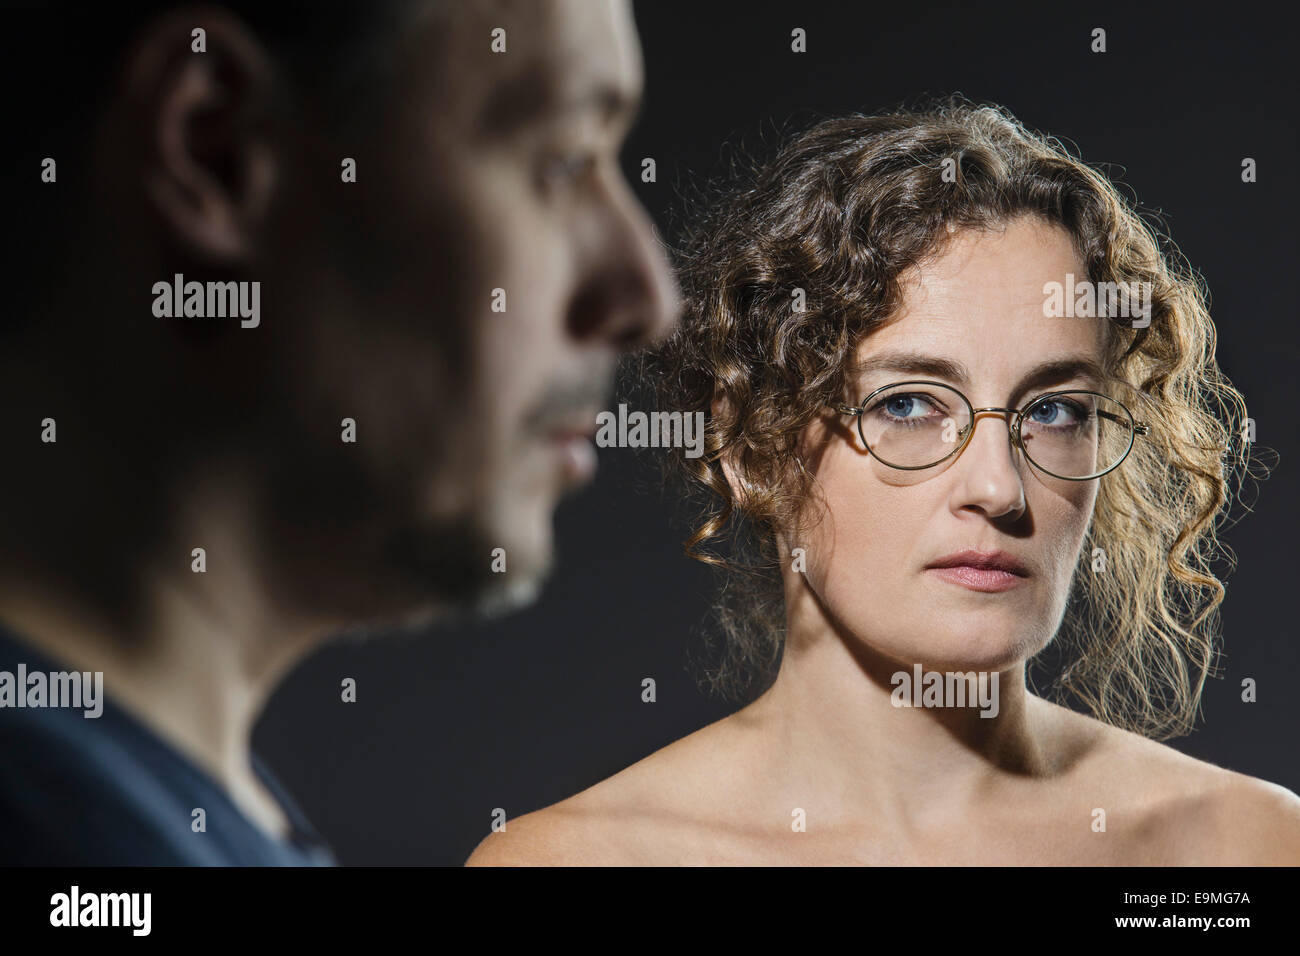 Angry woman looking at man in foreground Stock Photo